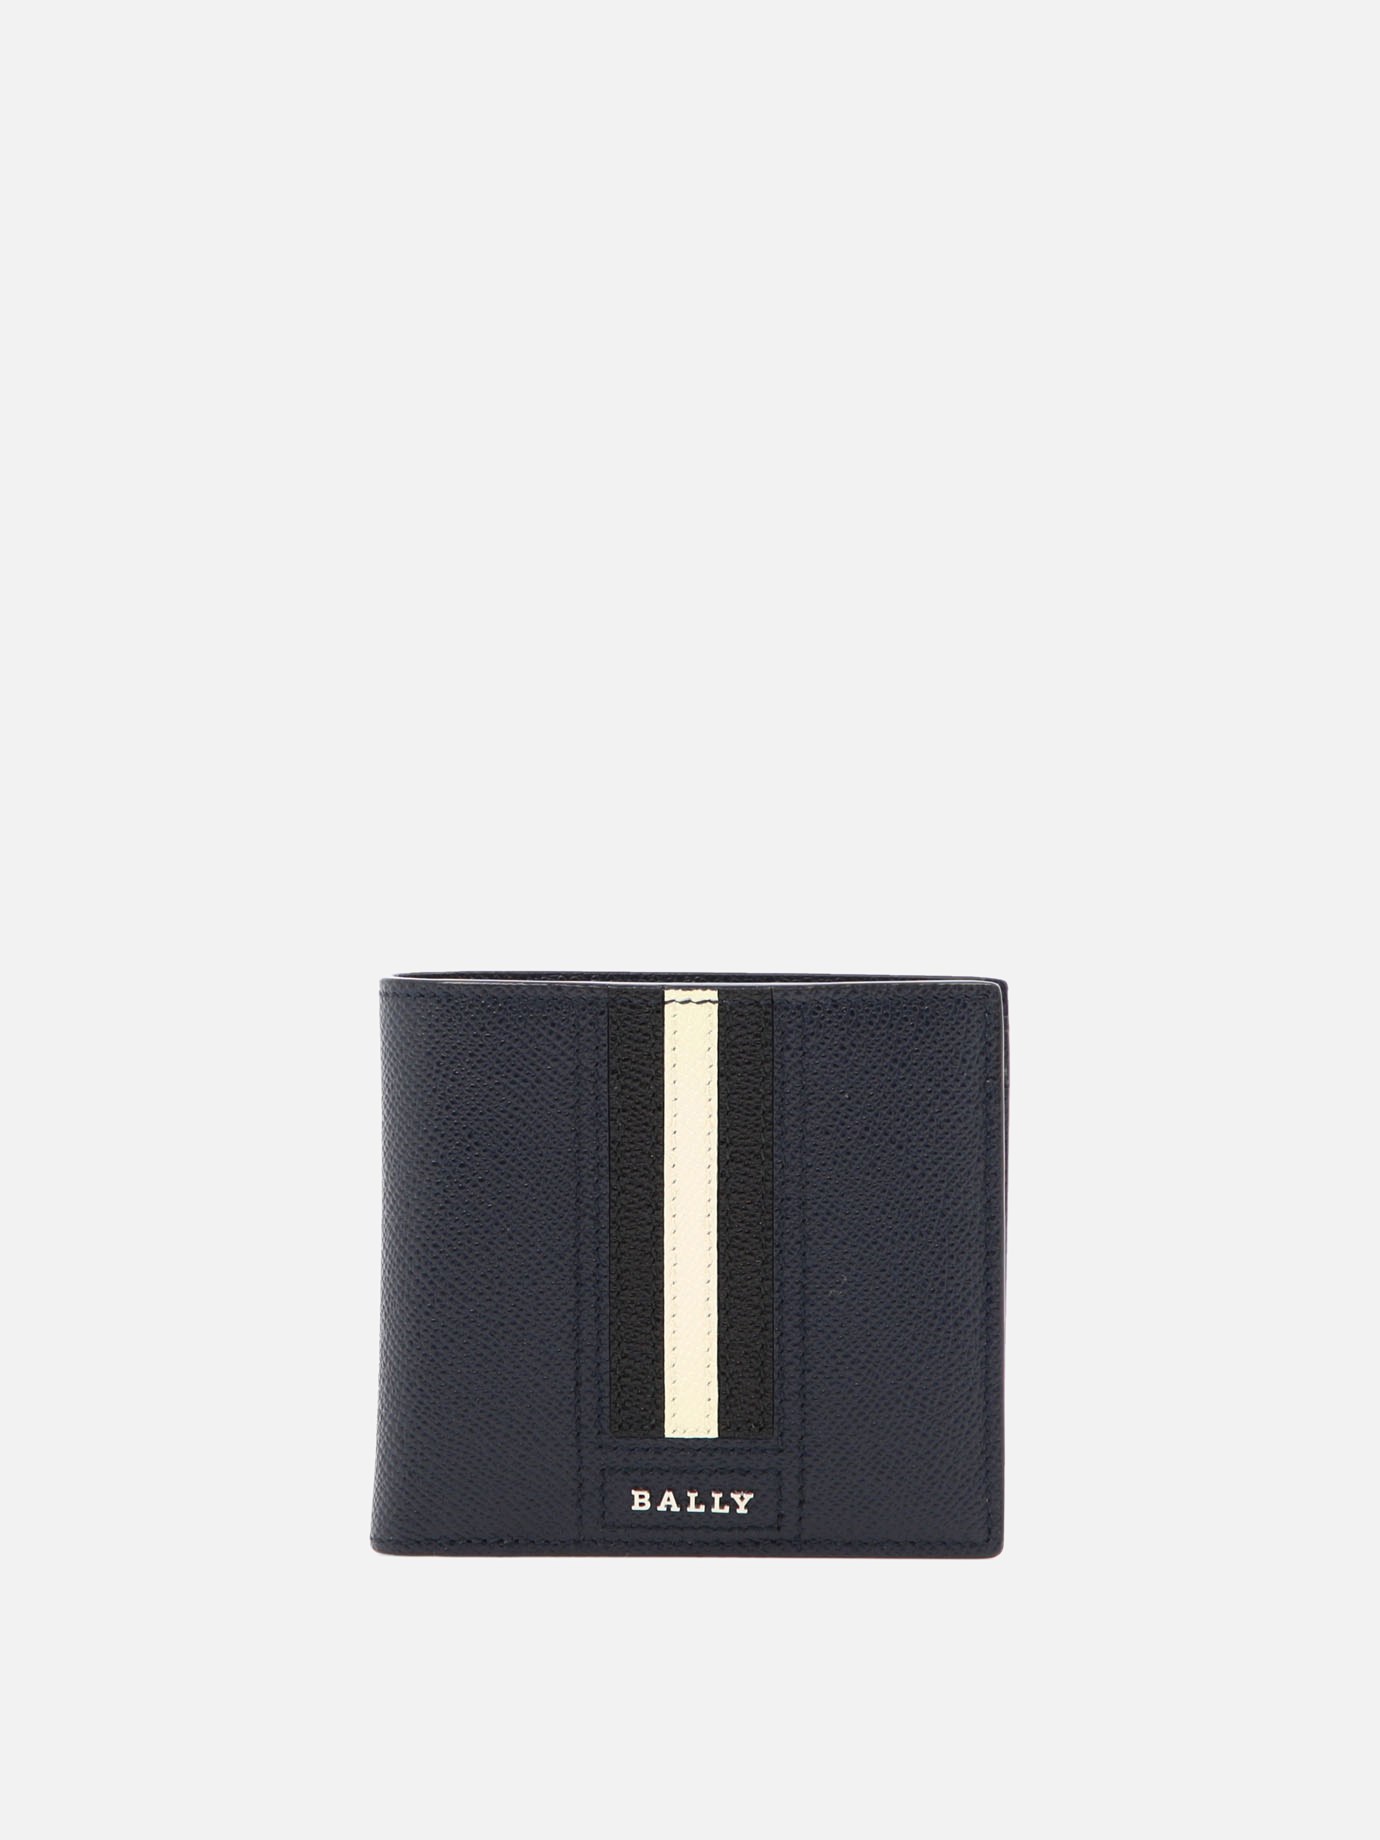  Teisel  walletby Bally - 1